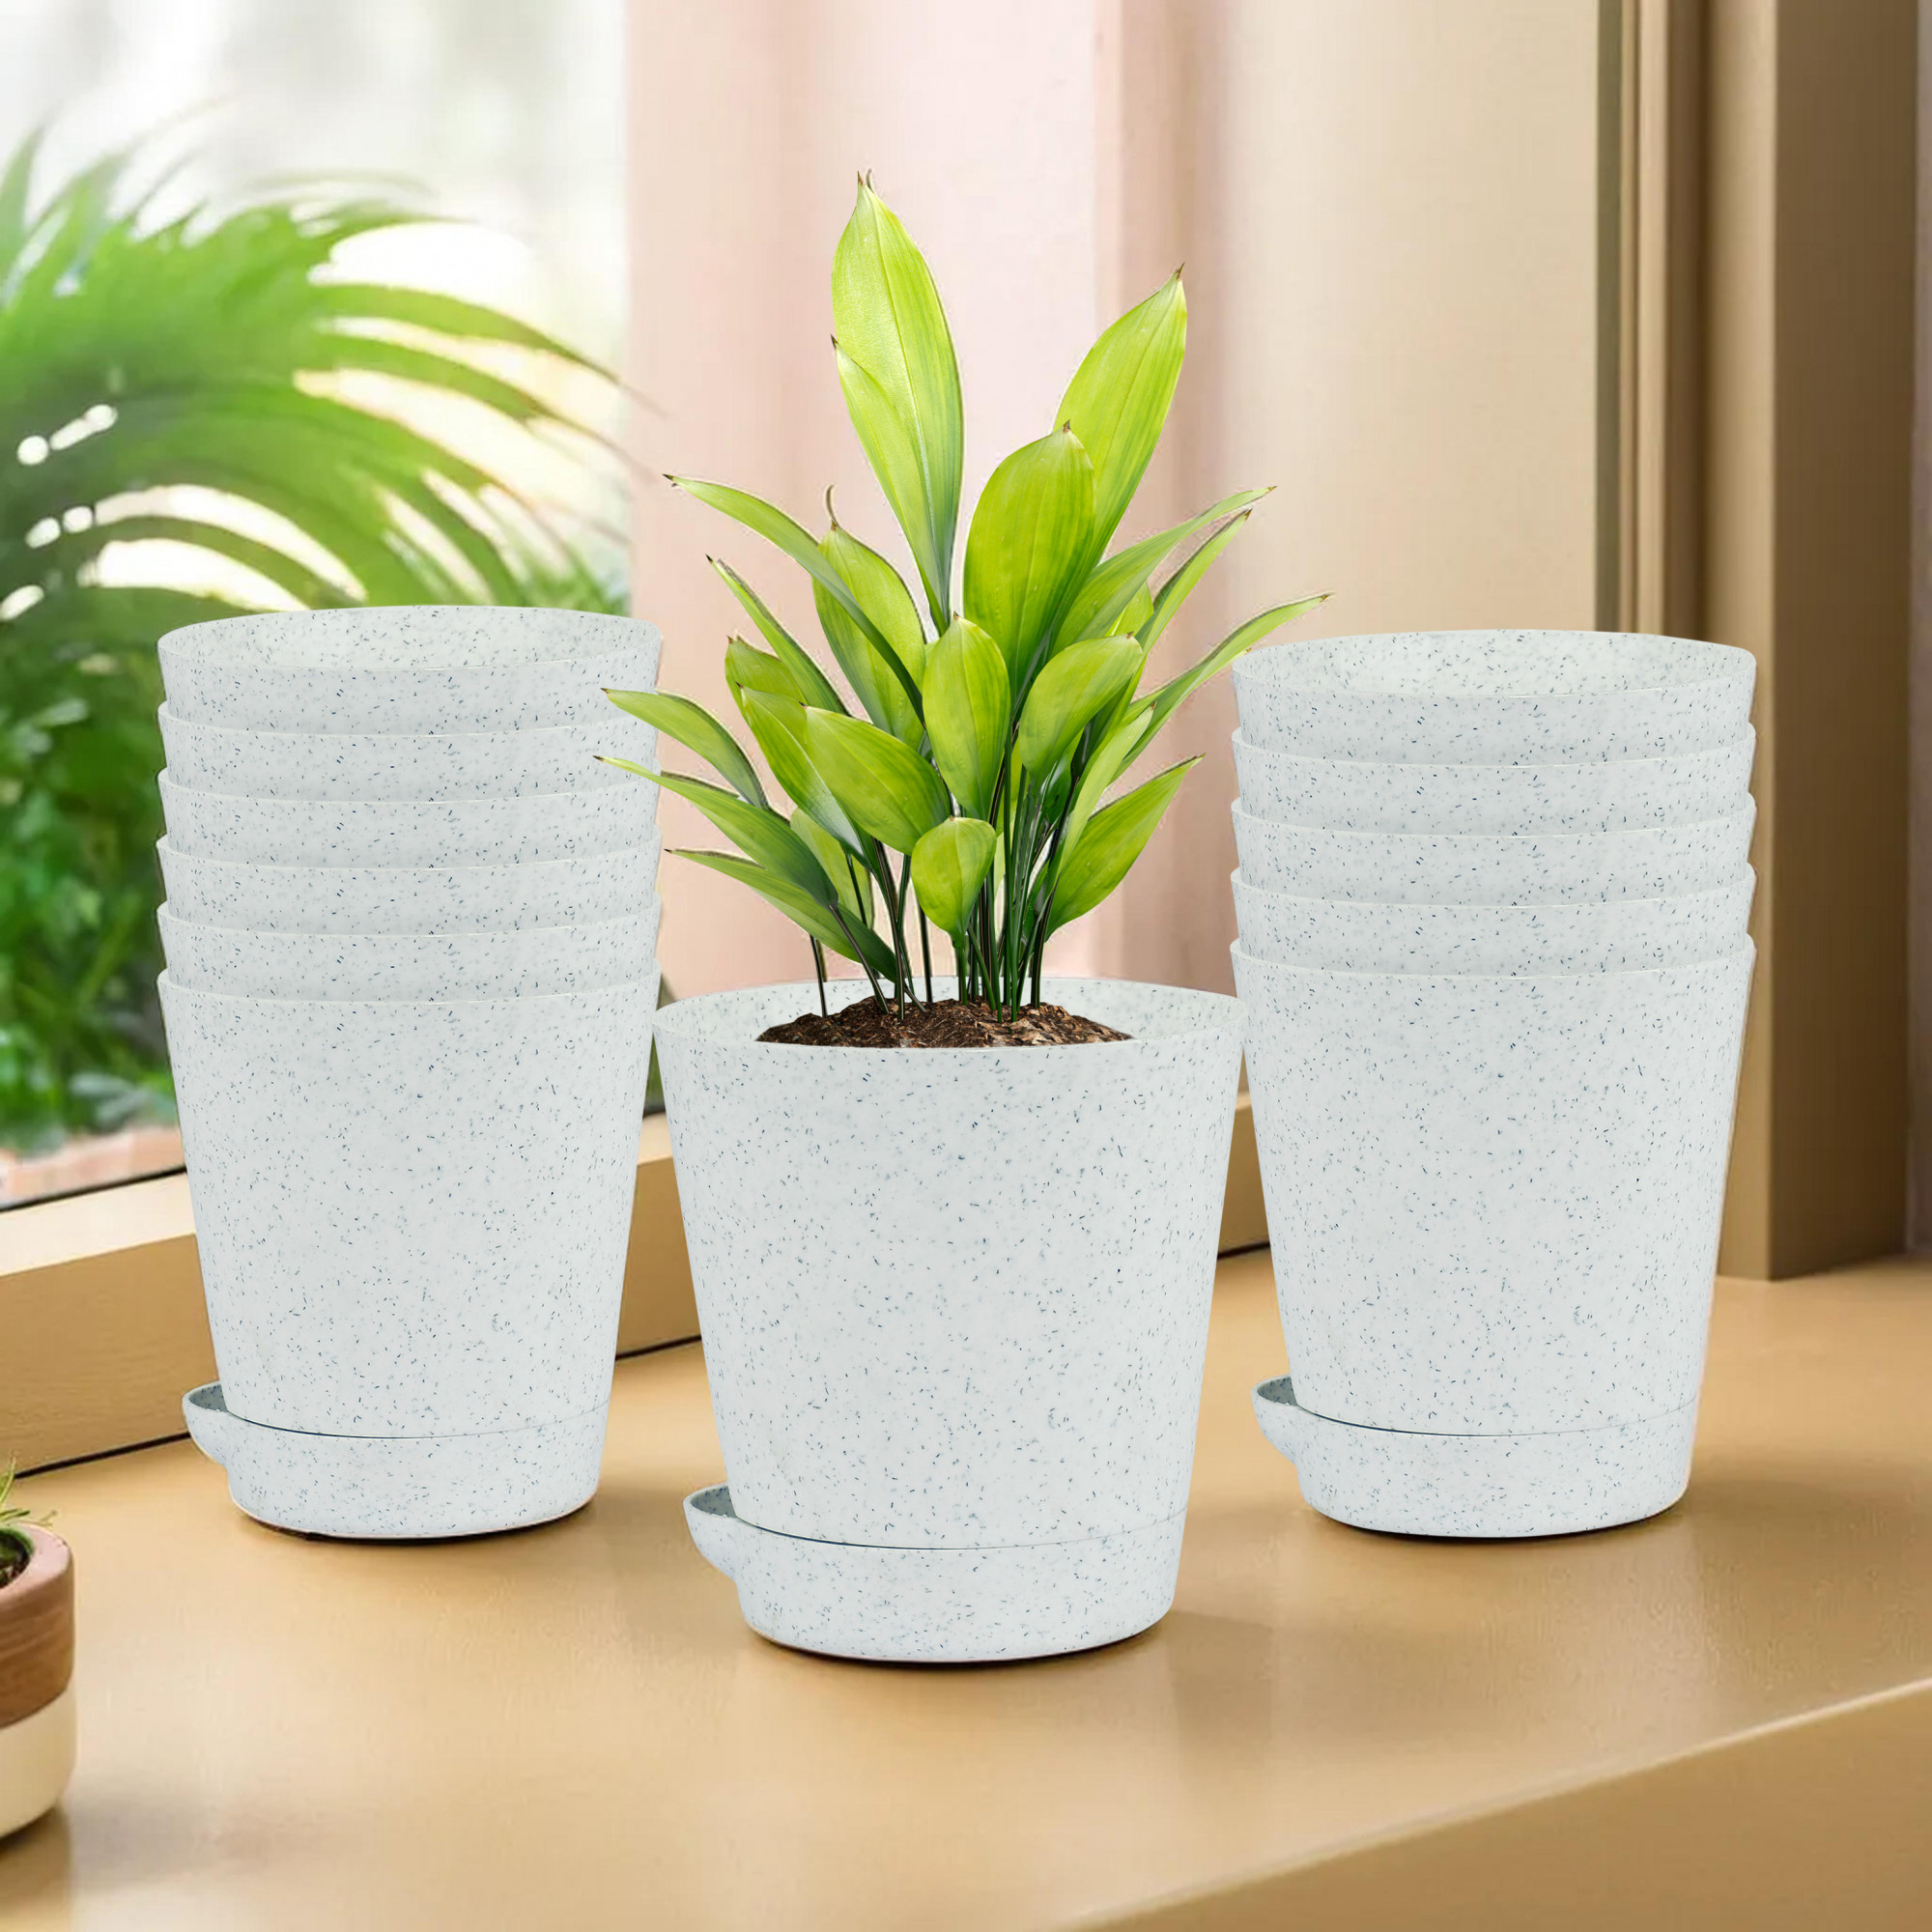 Kuber Industries Flower Pot | Flower Pot for Living Room-Office | Flower Planters for Home-office-Lawns & Garden Décor | Self Watering Flower Planters Pots | Marble Titan | 4 Inch | White